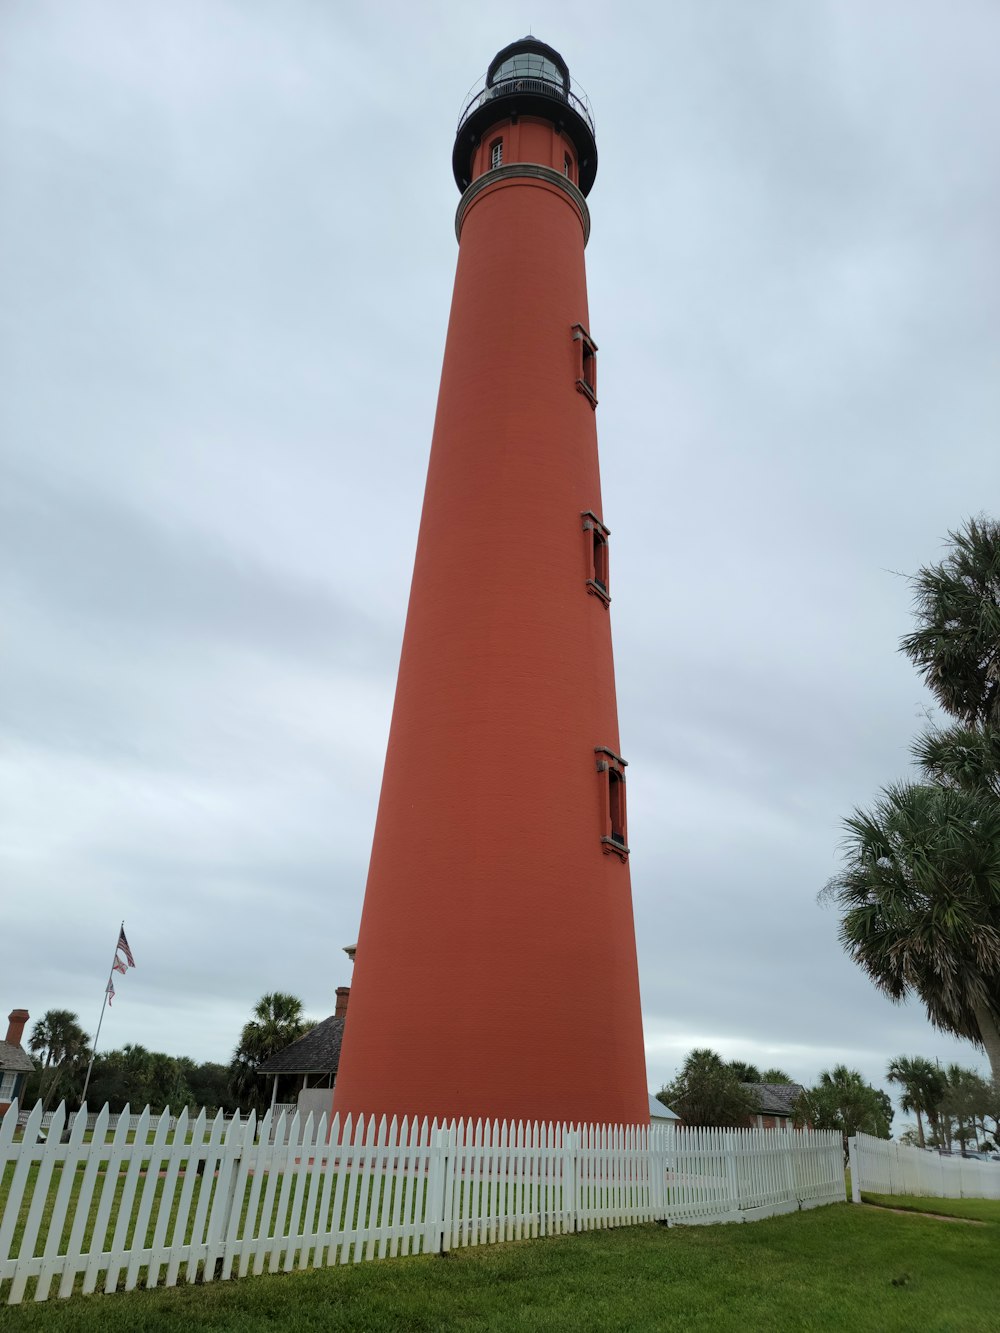 a tall red light house sitting next to a white picket fence